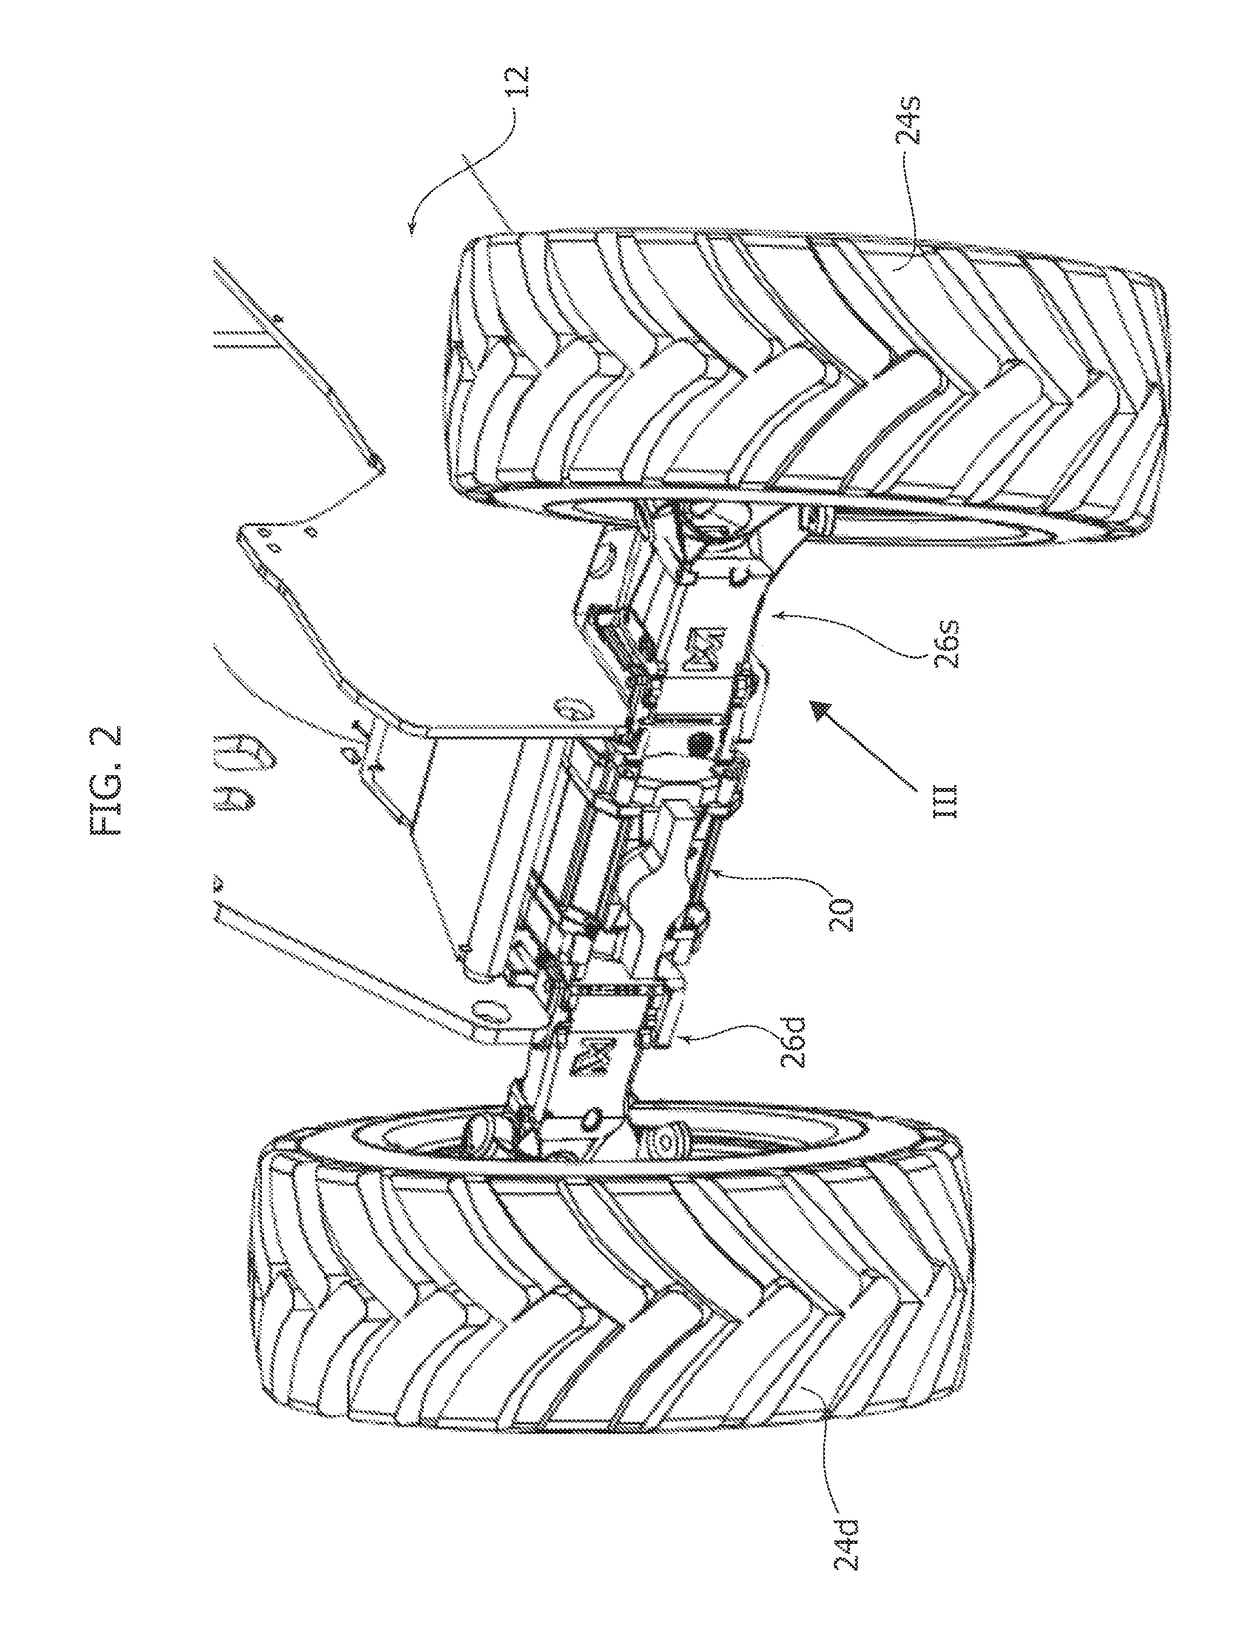 Lifting vehicle with a transverse stability control system